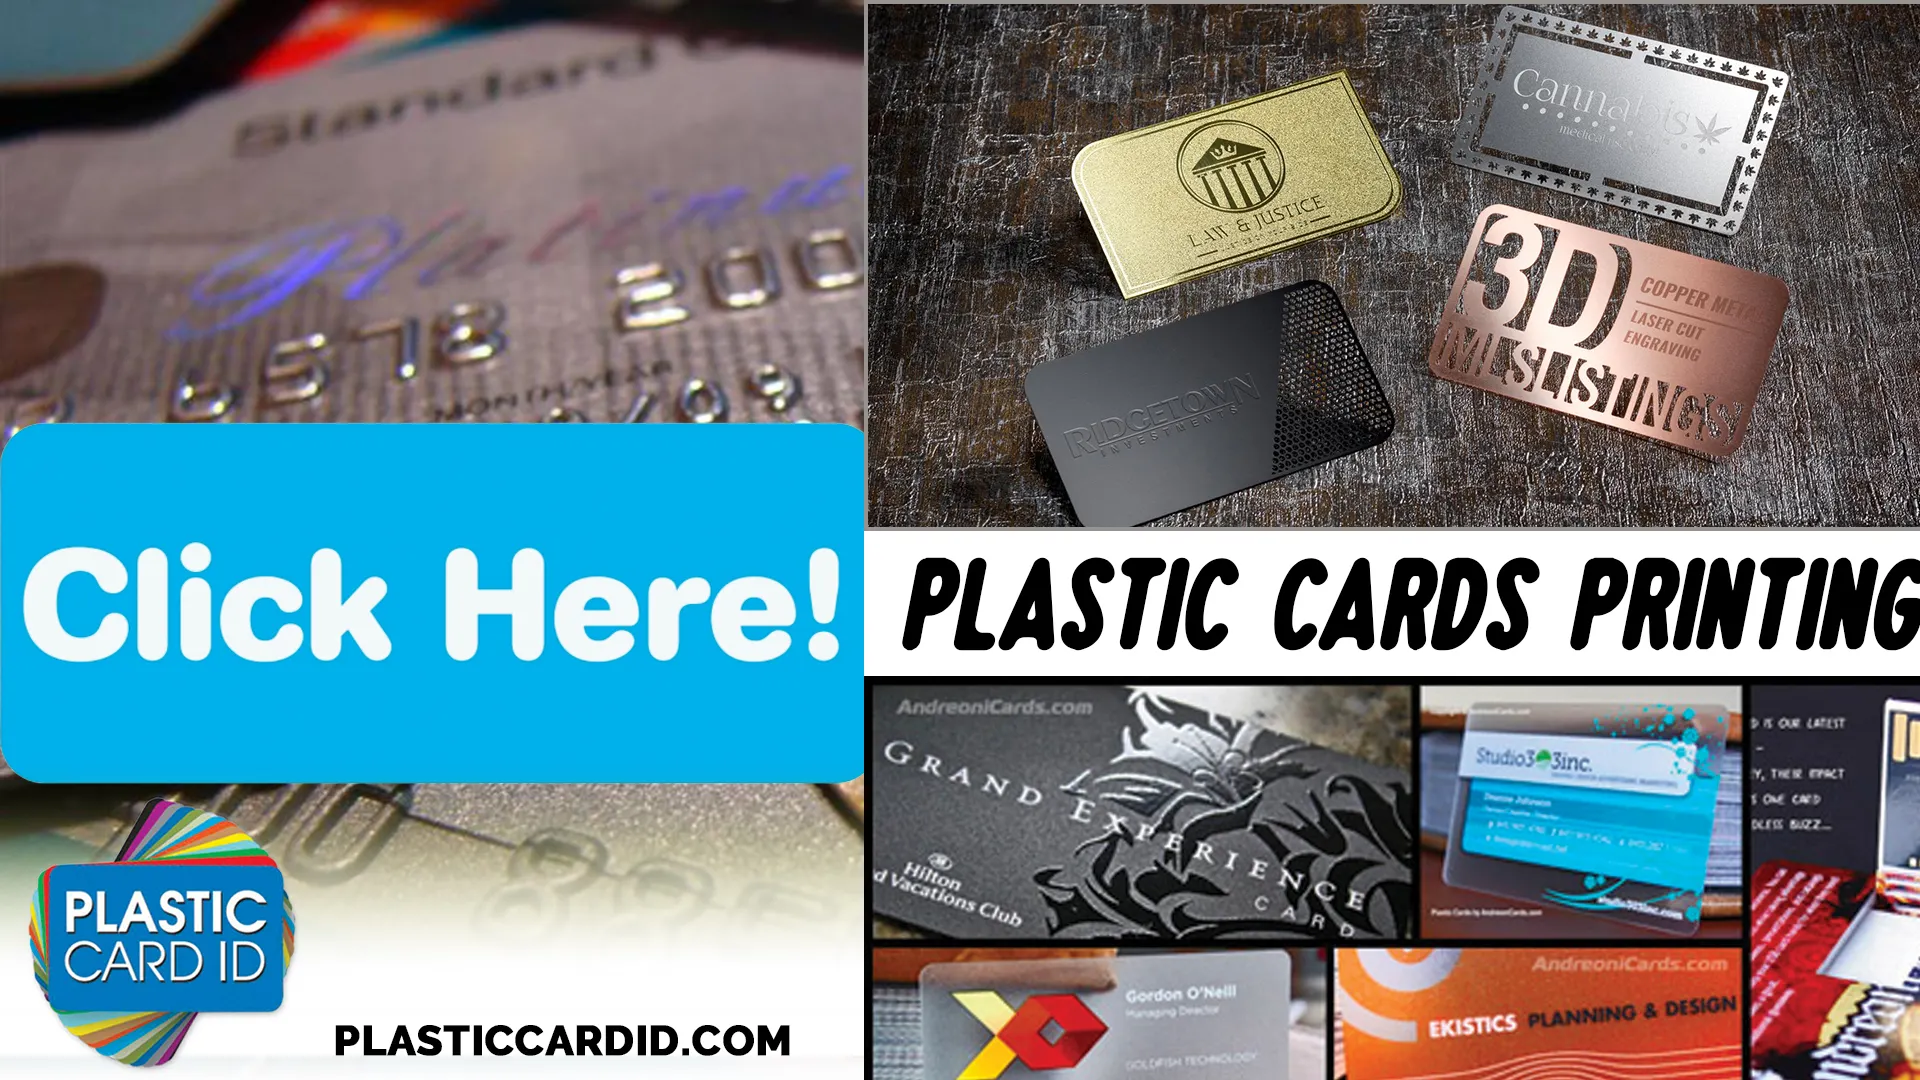 Welcome to Plastic Card ID




: Your Partner for Local Printing Services